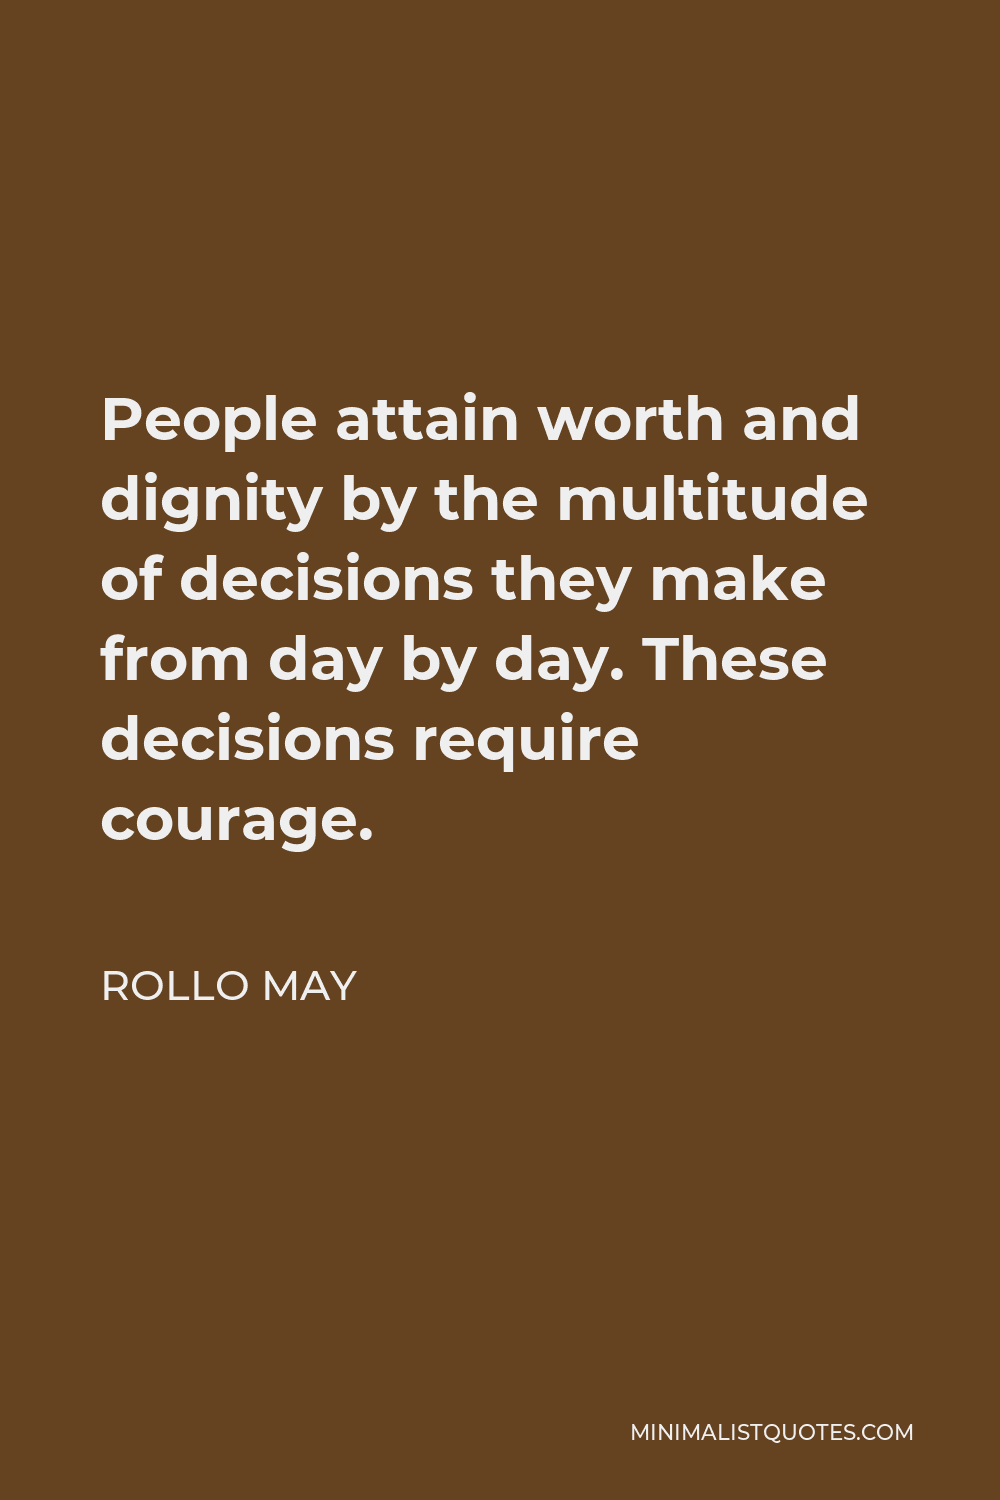 Rollo May Quote - People attain worth and dignity by the multitude of decisions they make from day to day.